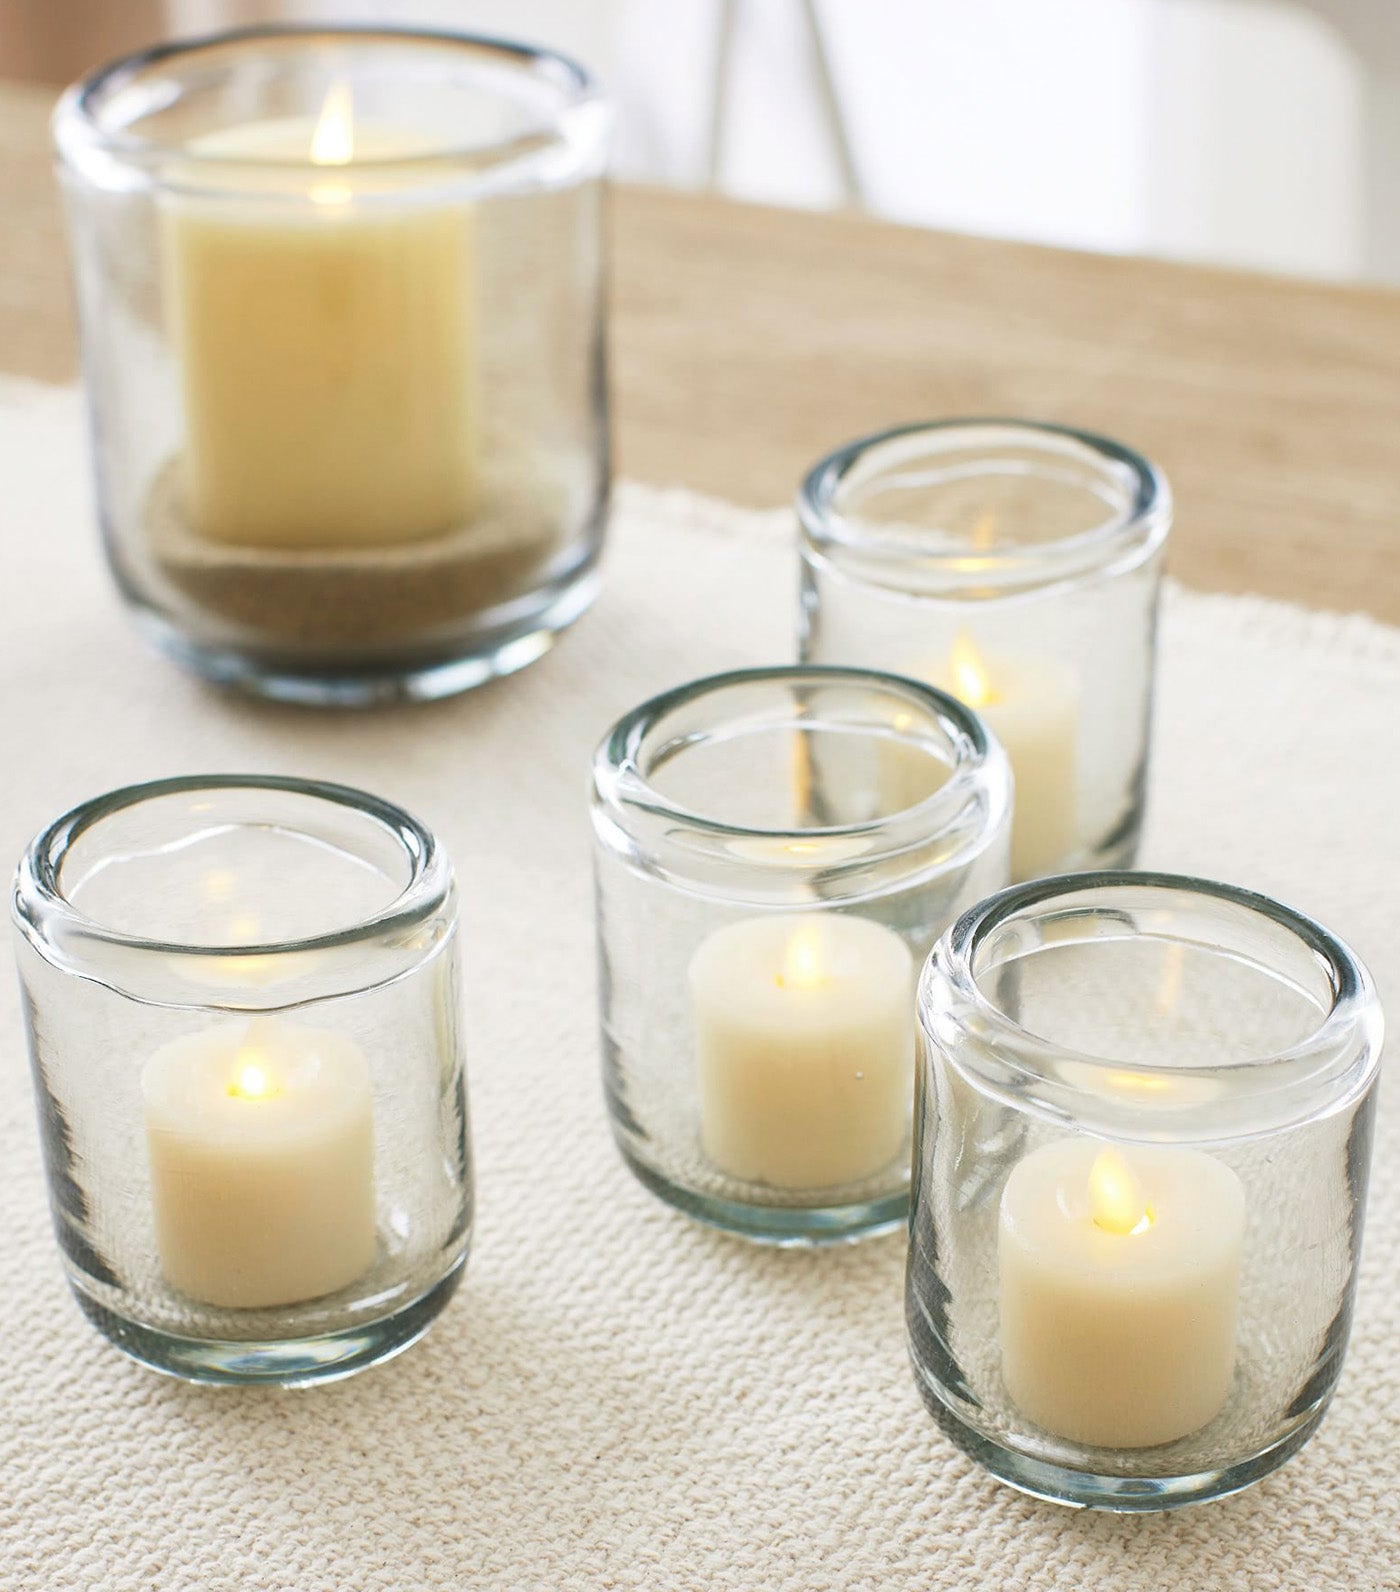 Pottery Barn Brie Handcrafted Candleholder